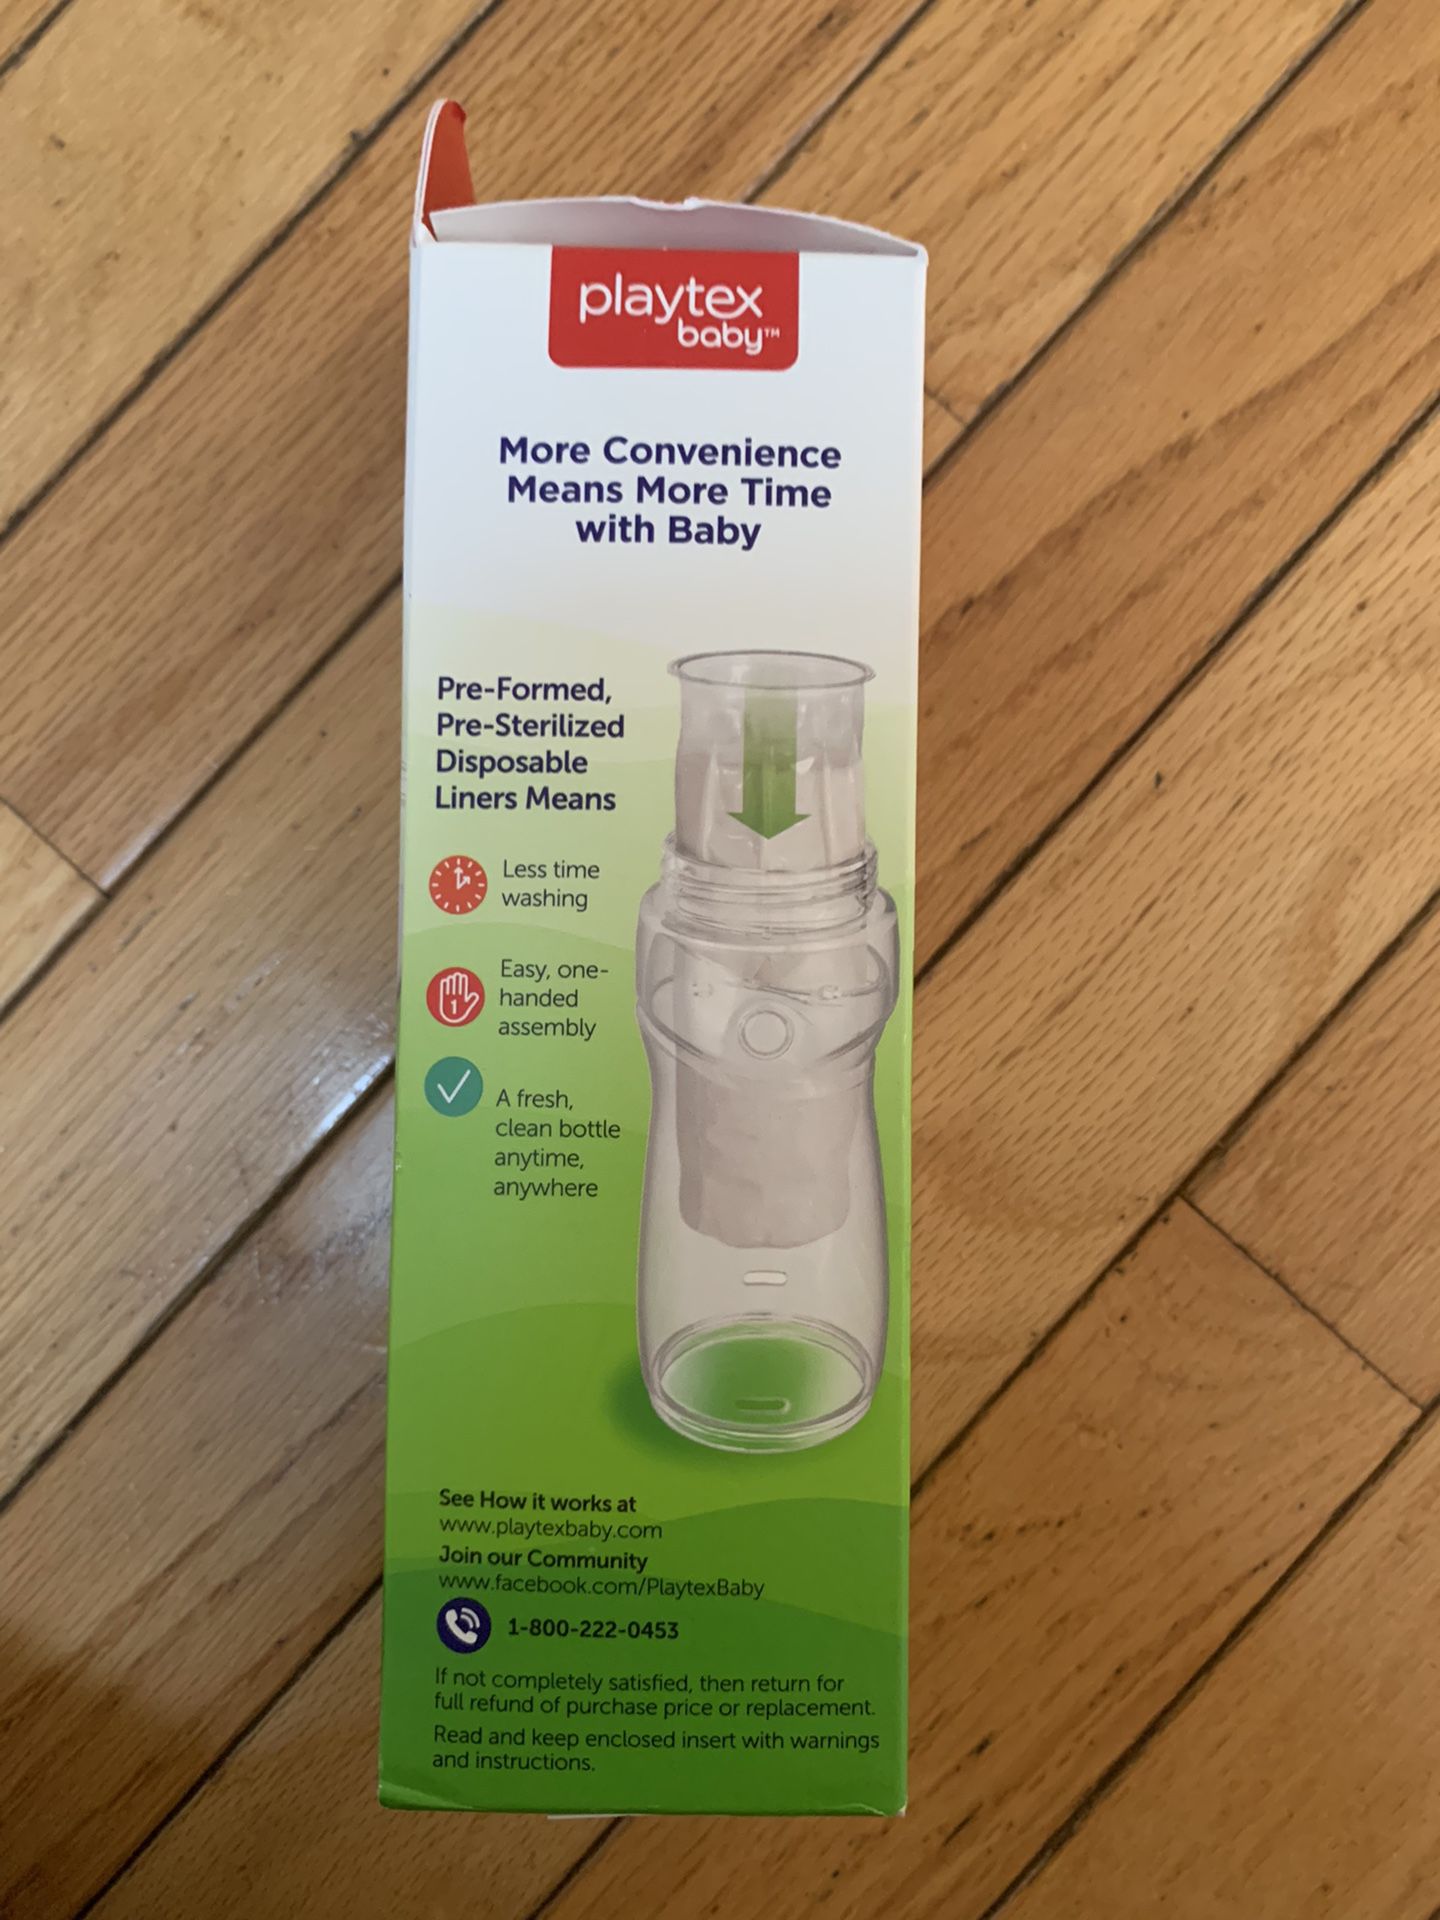 Baby Bottle With Dropins Liners 8-10oz For 3months+